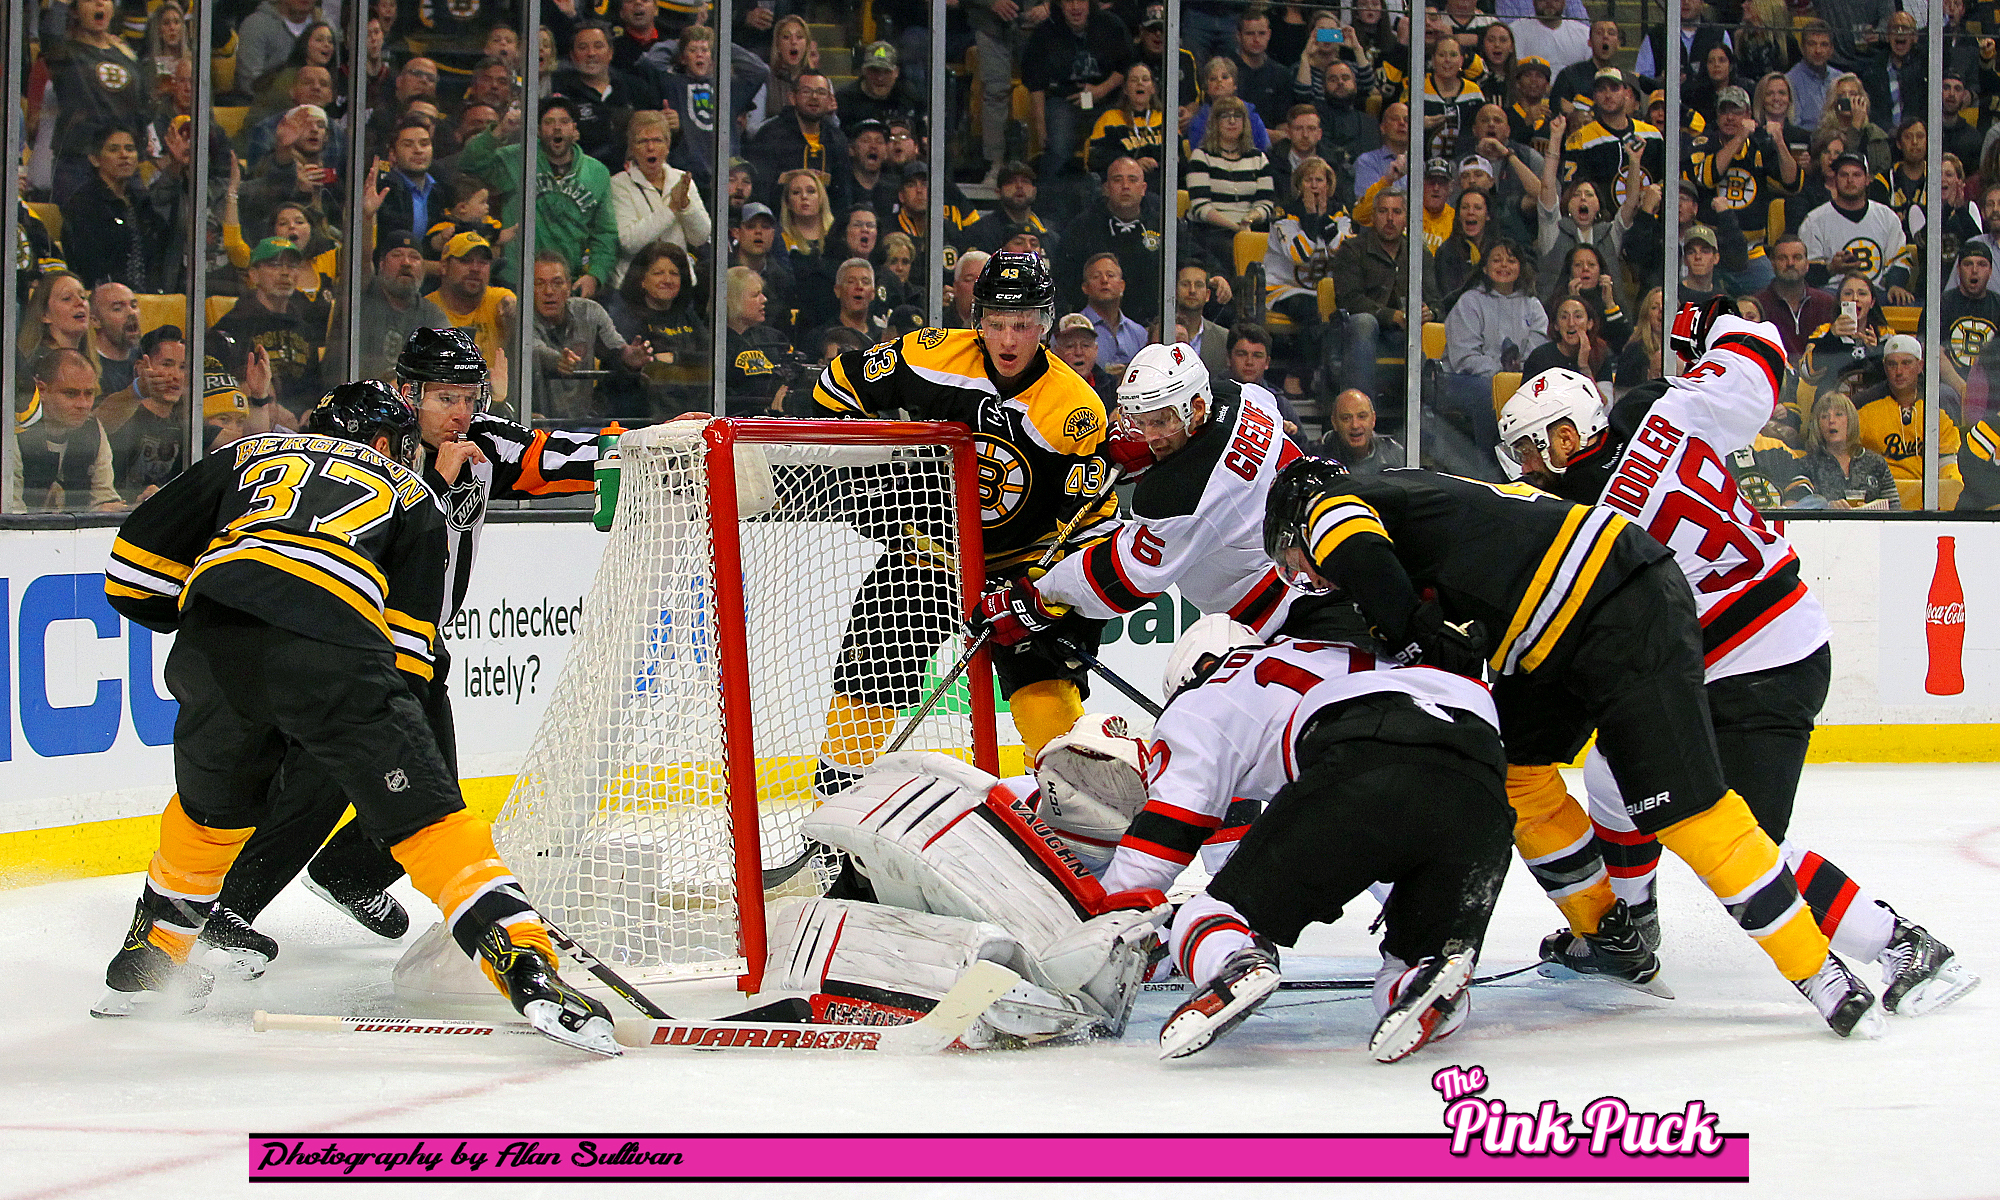 Group Bruins Devils The Pink Puck